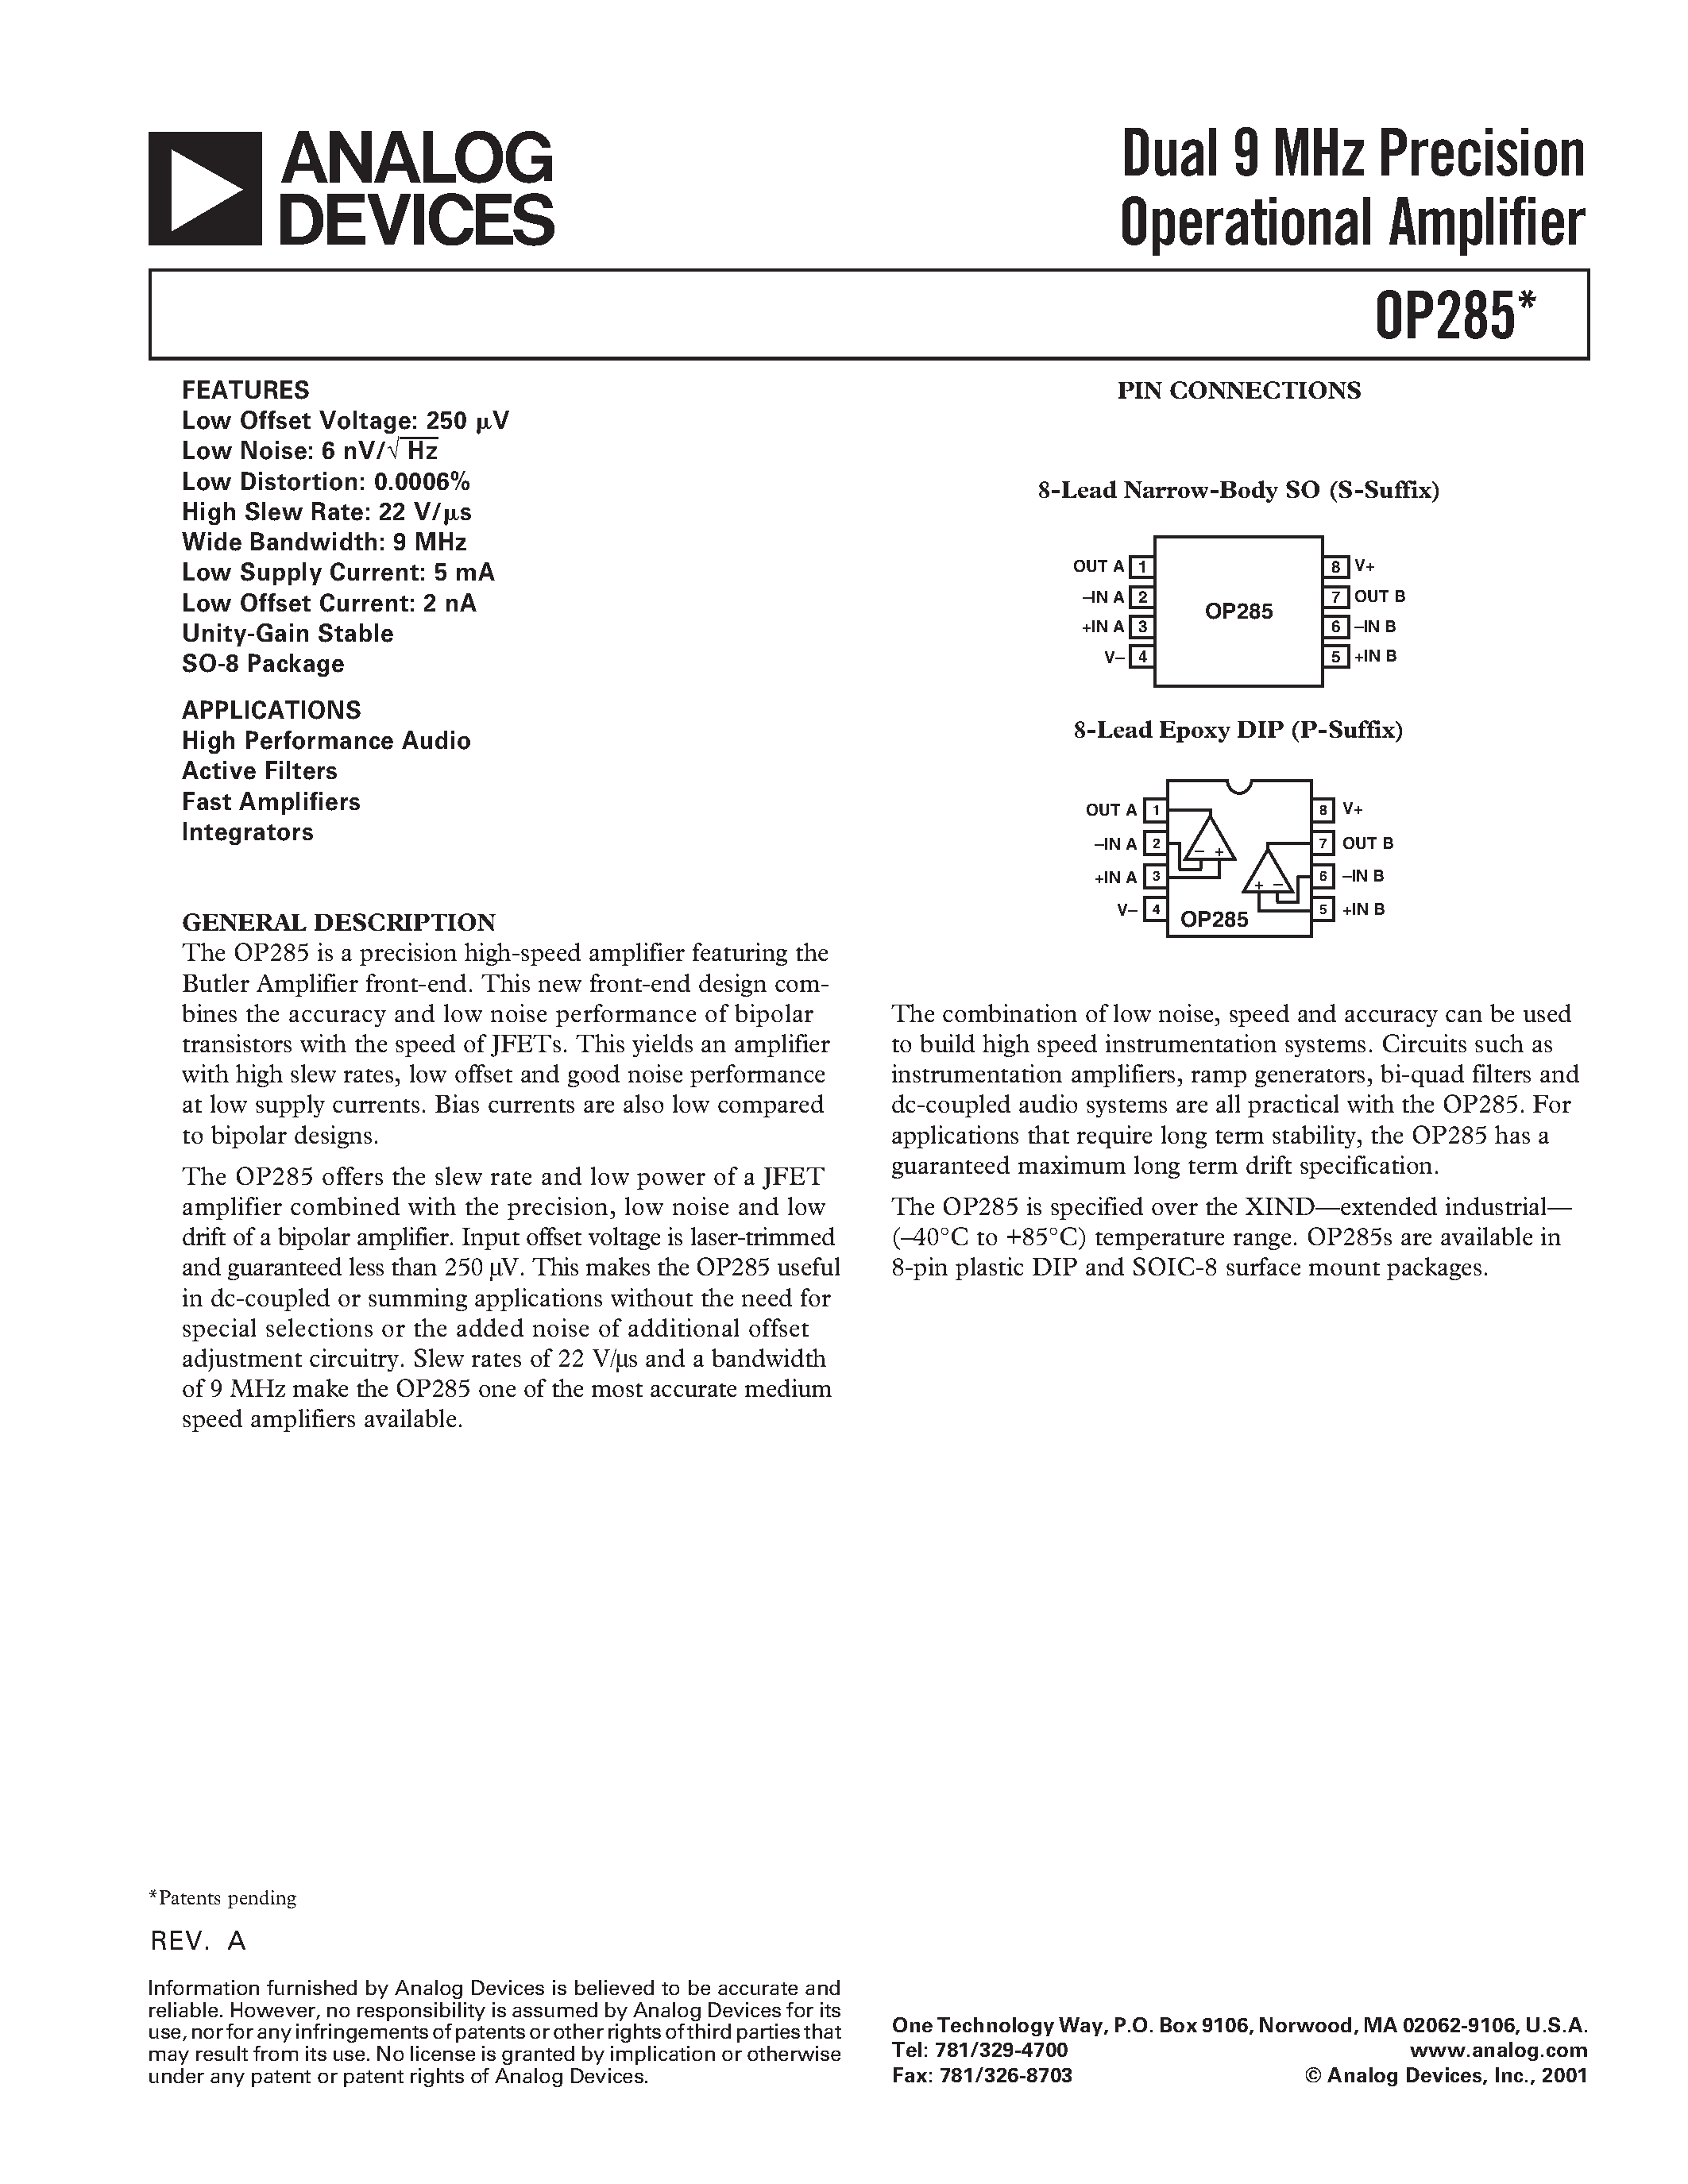 Datasheet OP285 - Dual 9 MHz Precision Operational Amplifier page 1